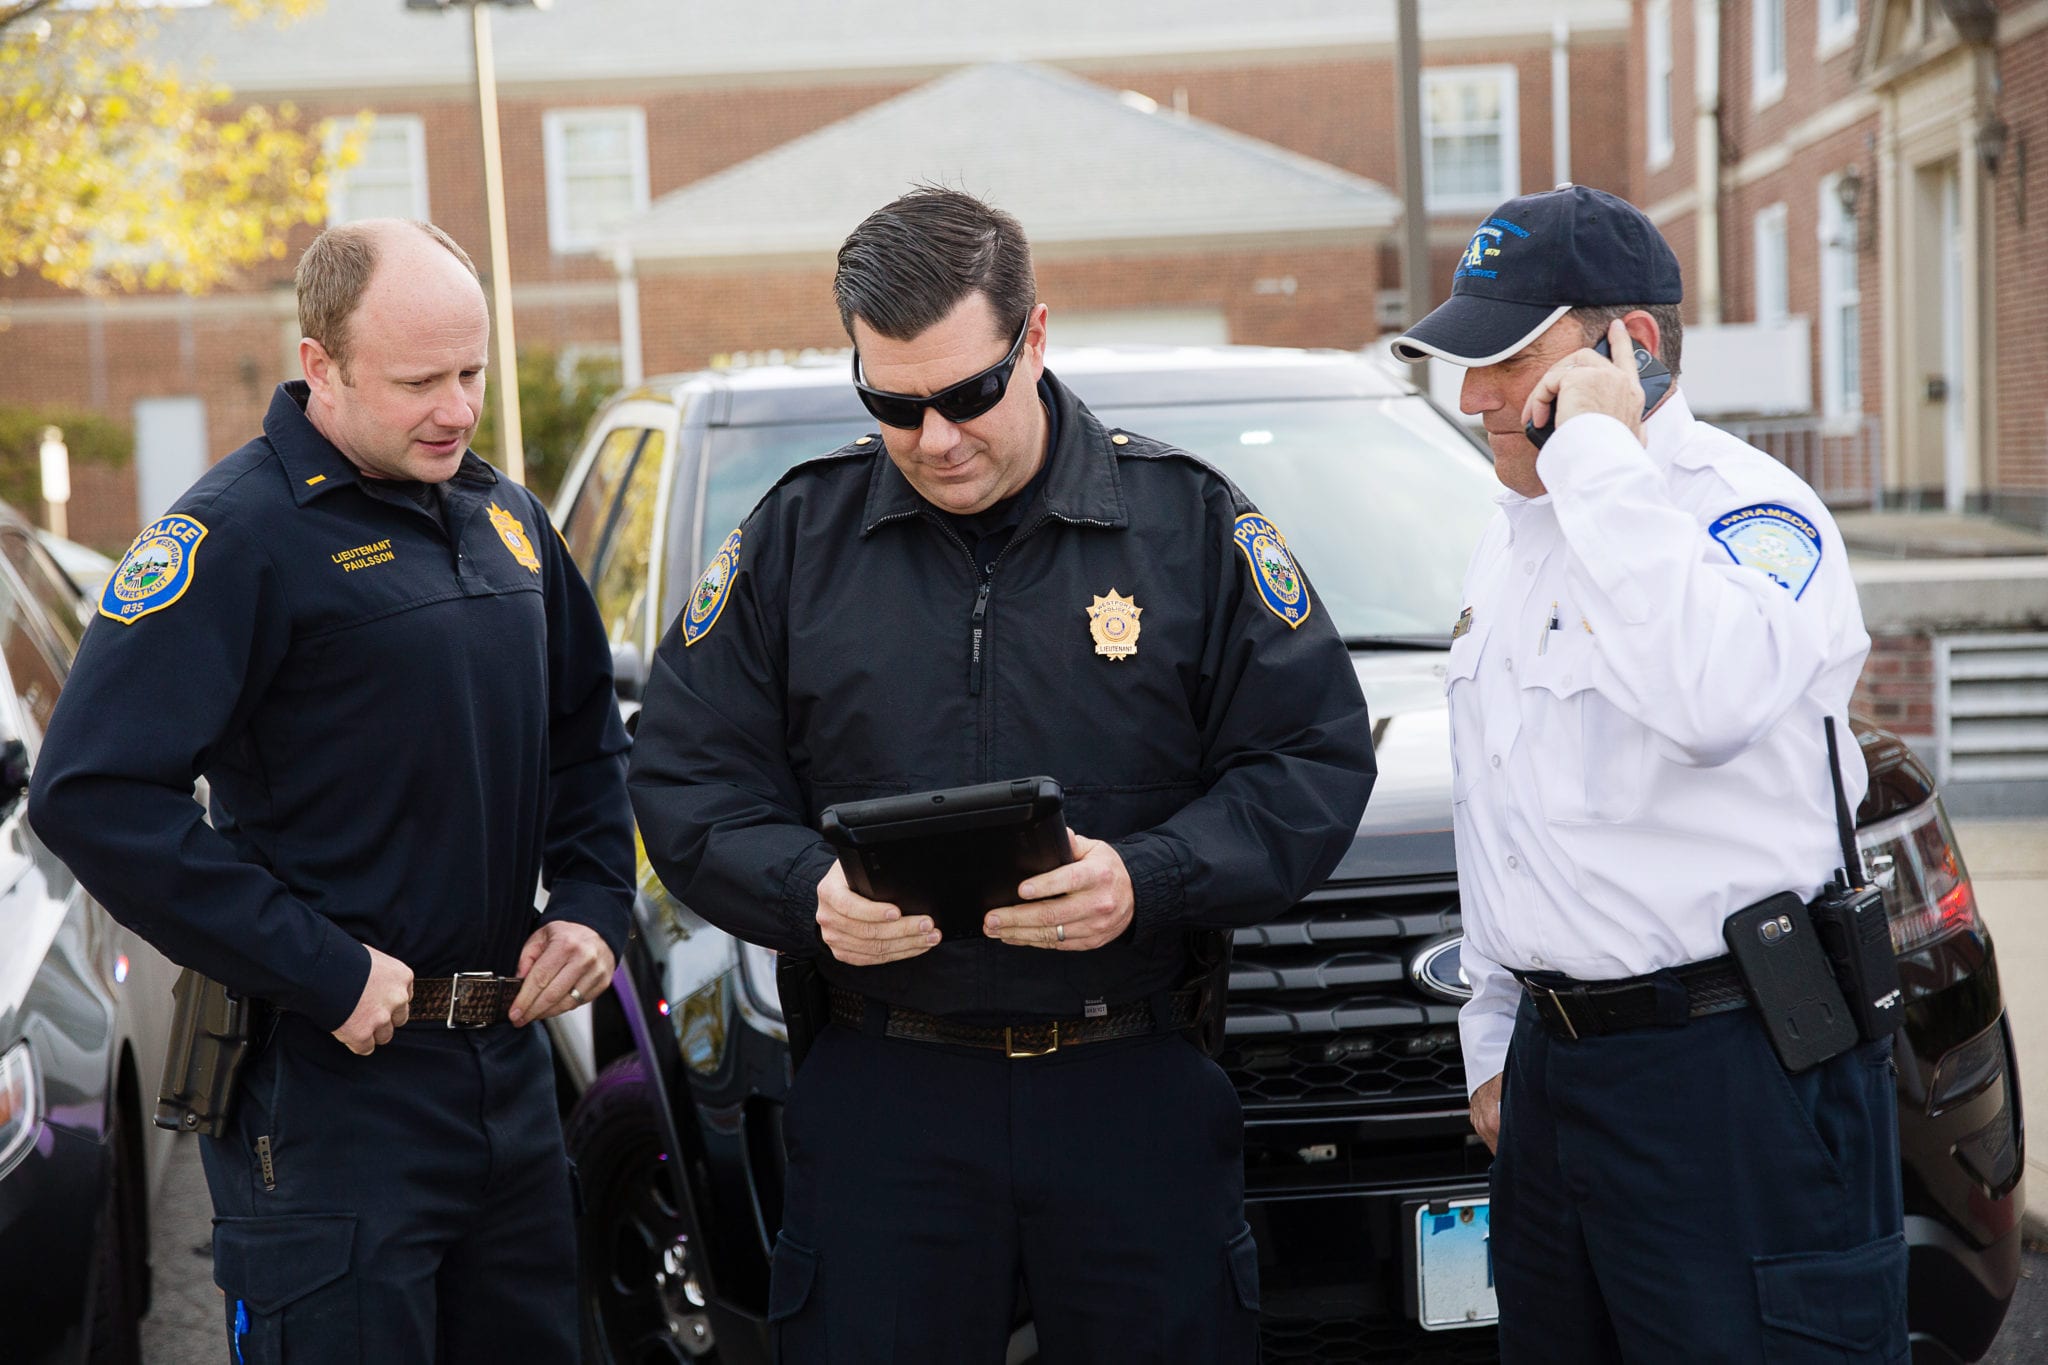 AT&T Policemen using digital tablet while another police officer talking on mobile phone